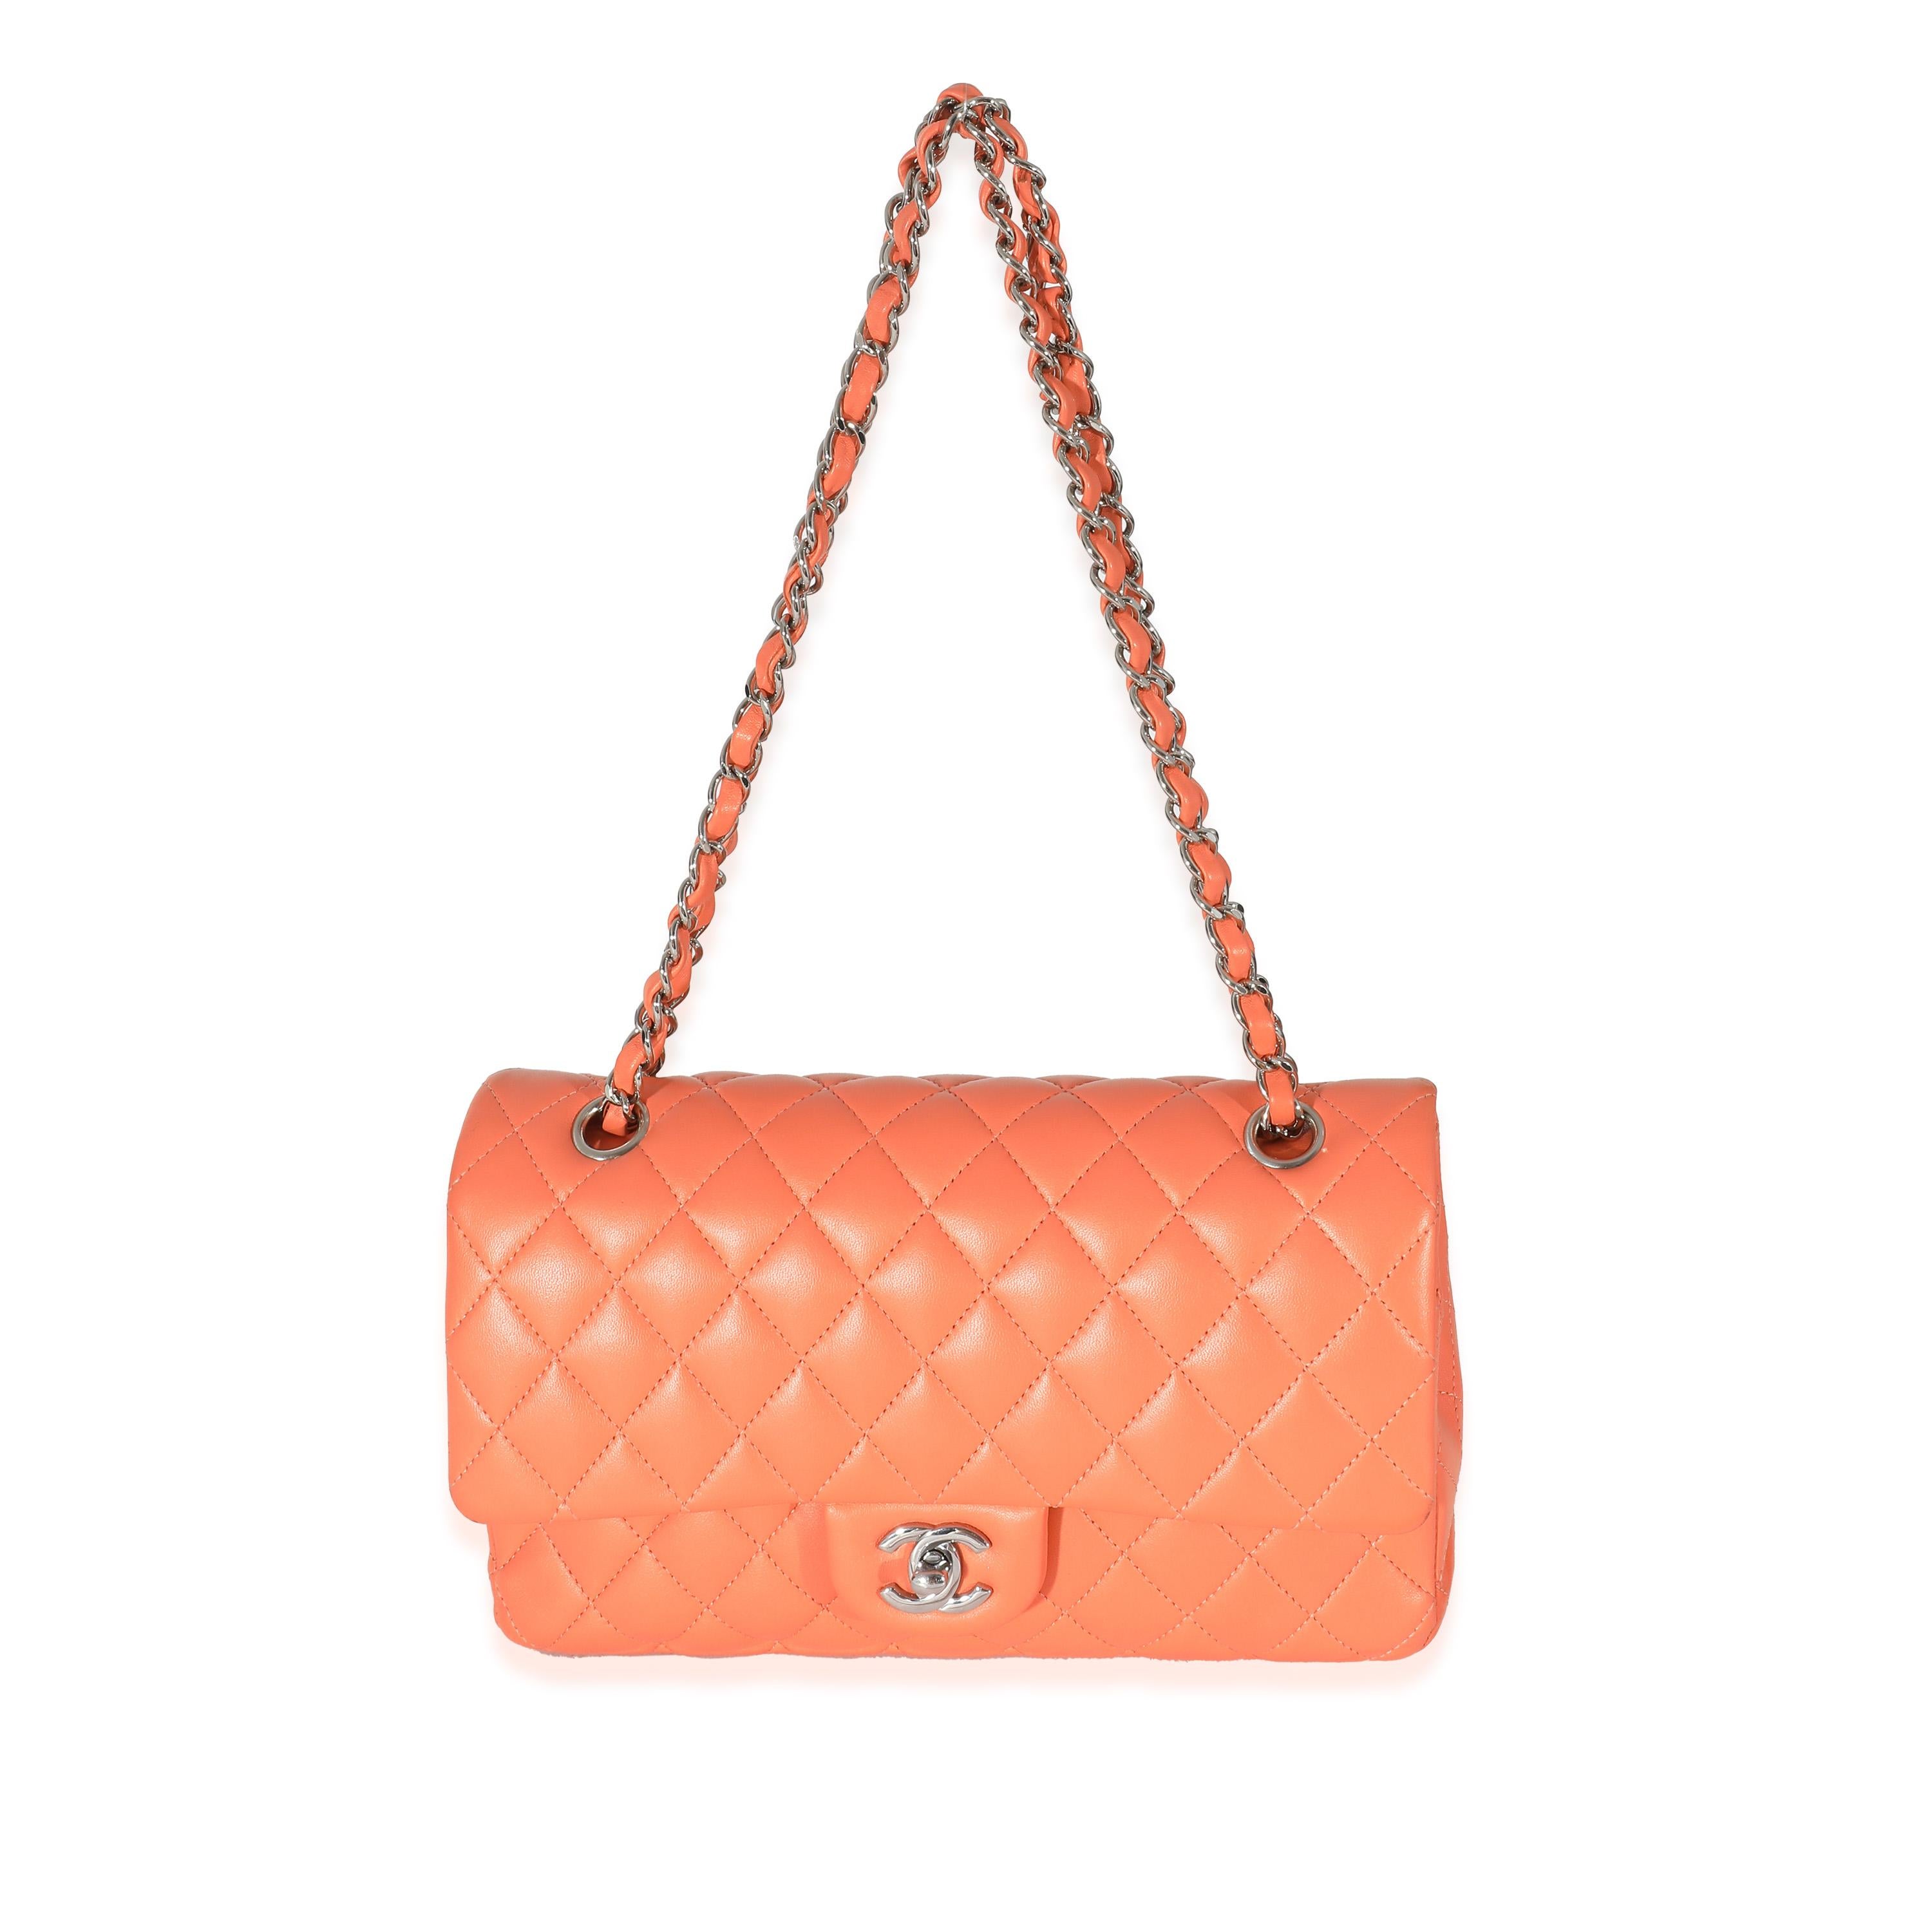 Listing Title: Chanel Orange Quilted Lambskin Medium Classic Double Flap Bag
SKU: 134010
Condition: Pre-owned 
Handbag Condition: Very Good
Condition Comments: Item is in very good condition with minor signs of wear. Exterior heavy scuffing, marks